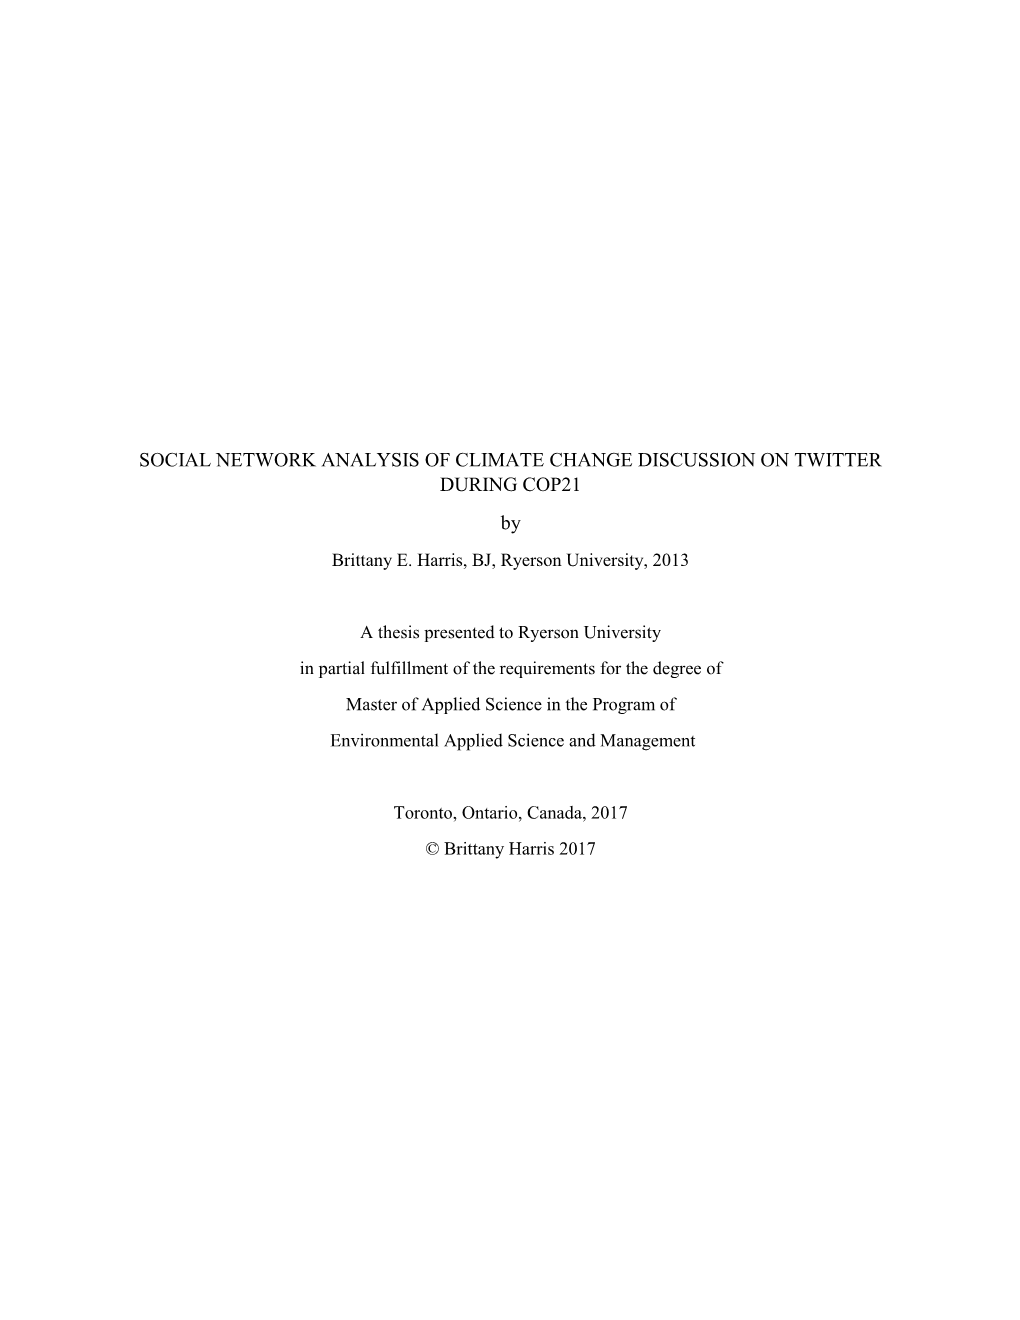 SOCIAL NETWORK ANALYSIS of CLIMATE CHANGE DISCUSSION on TWITTER DURING COP21 by Brittany E